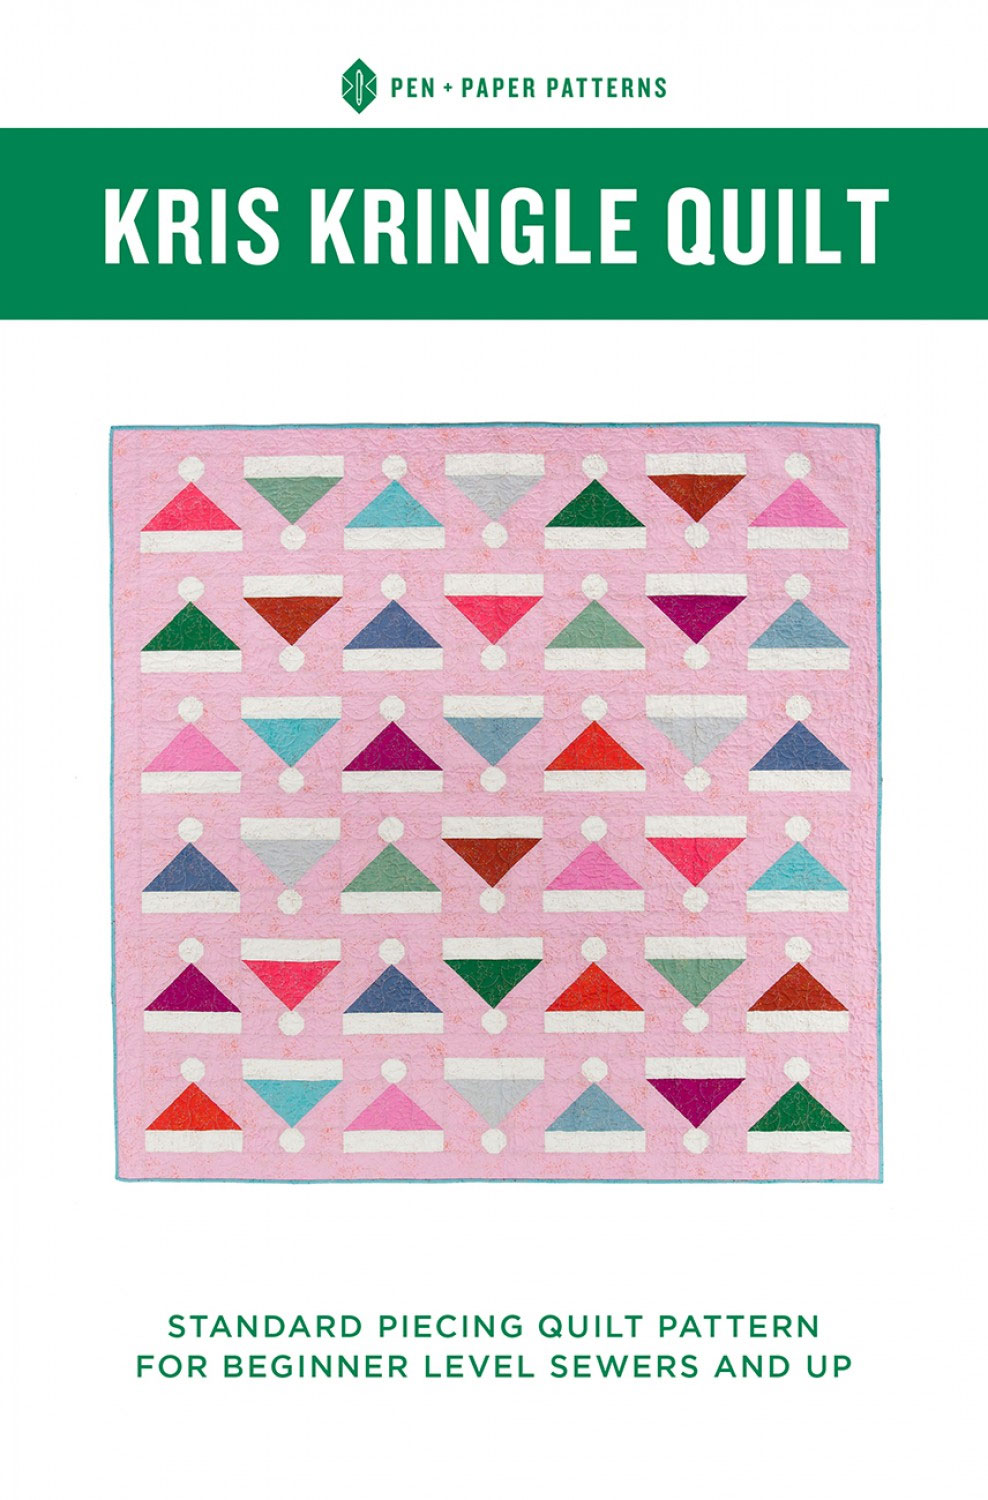 Kris-Kringle-quilt-sewing-pattern-from-Pen-plus-paper-patterns-front